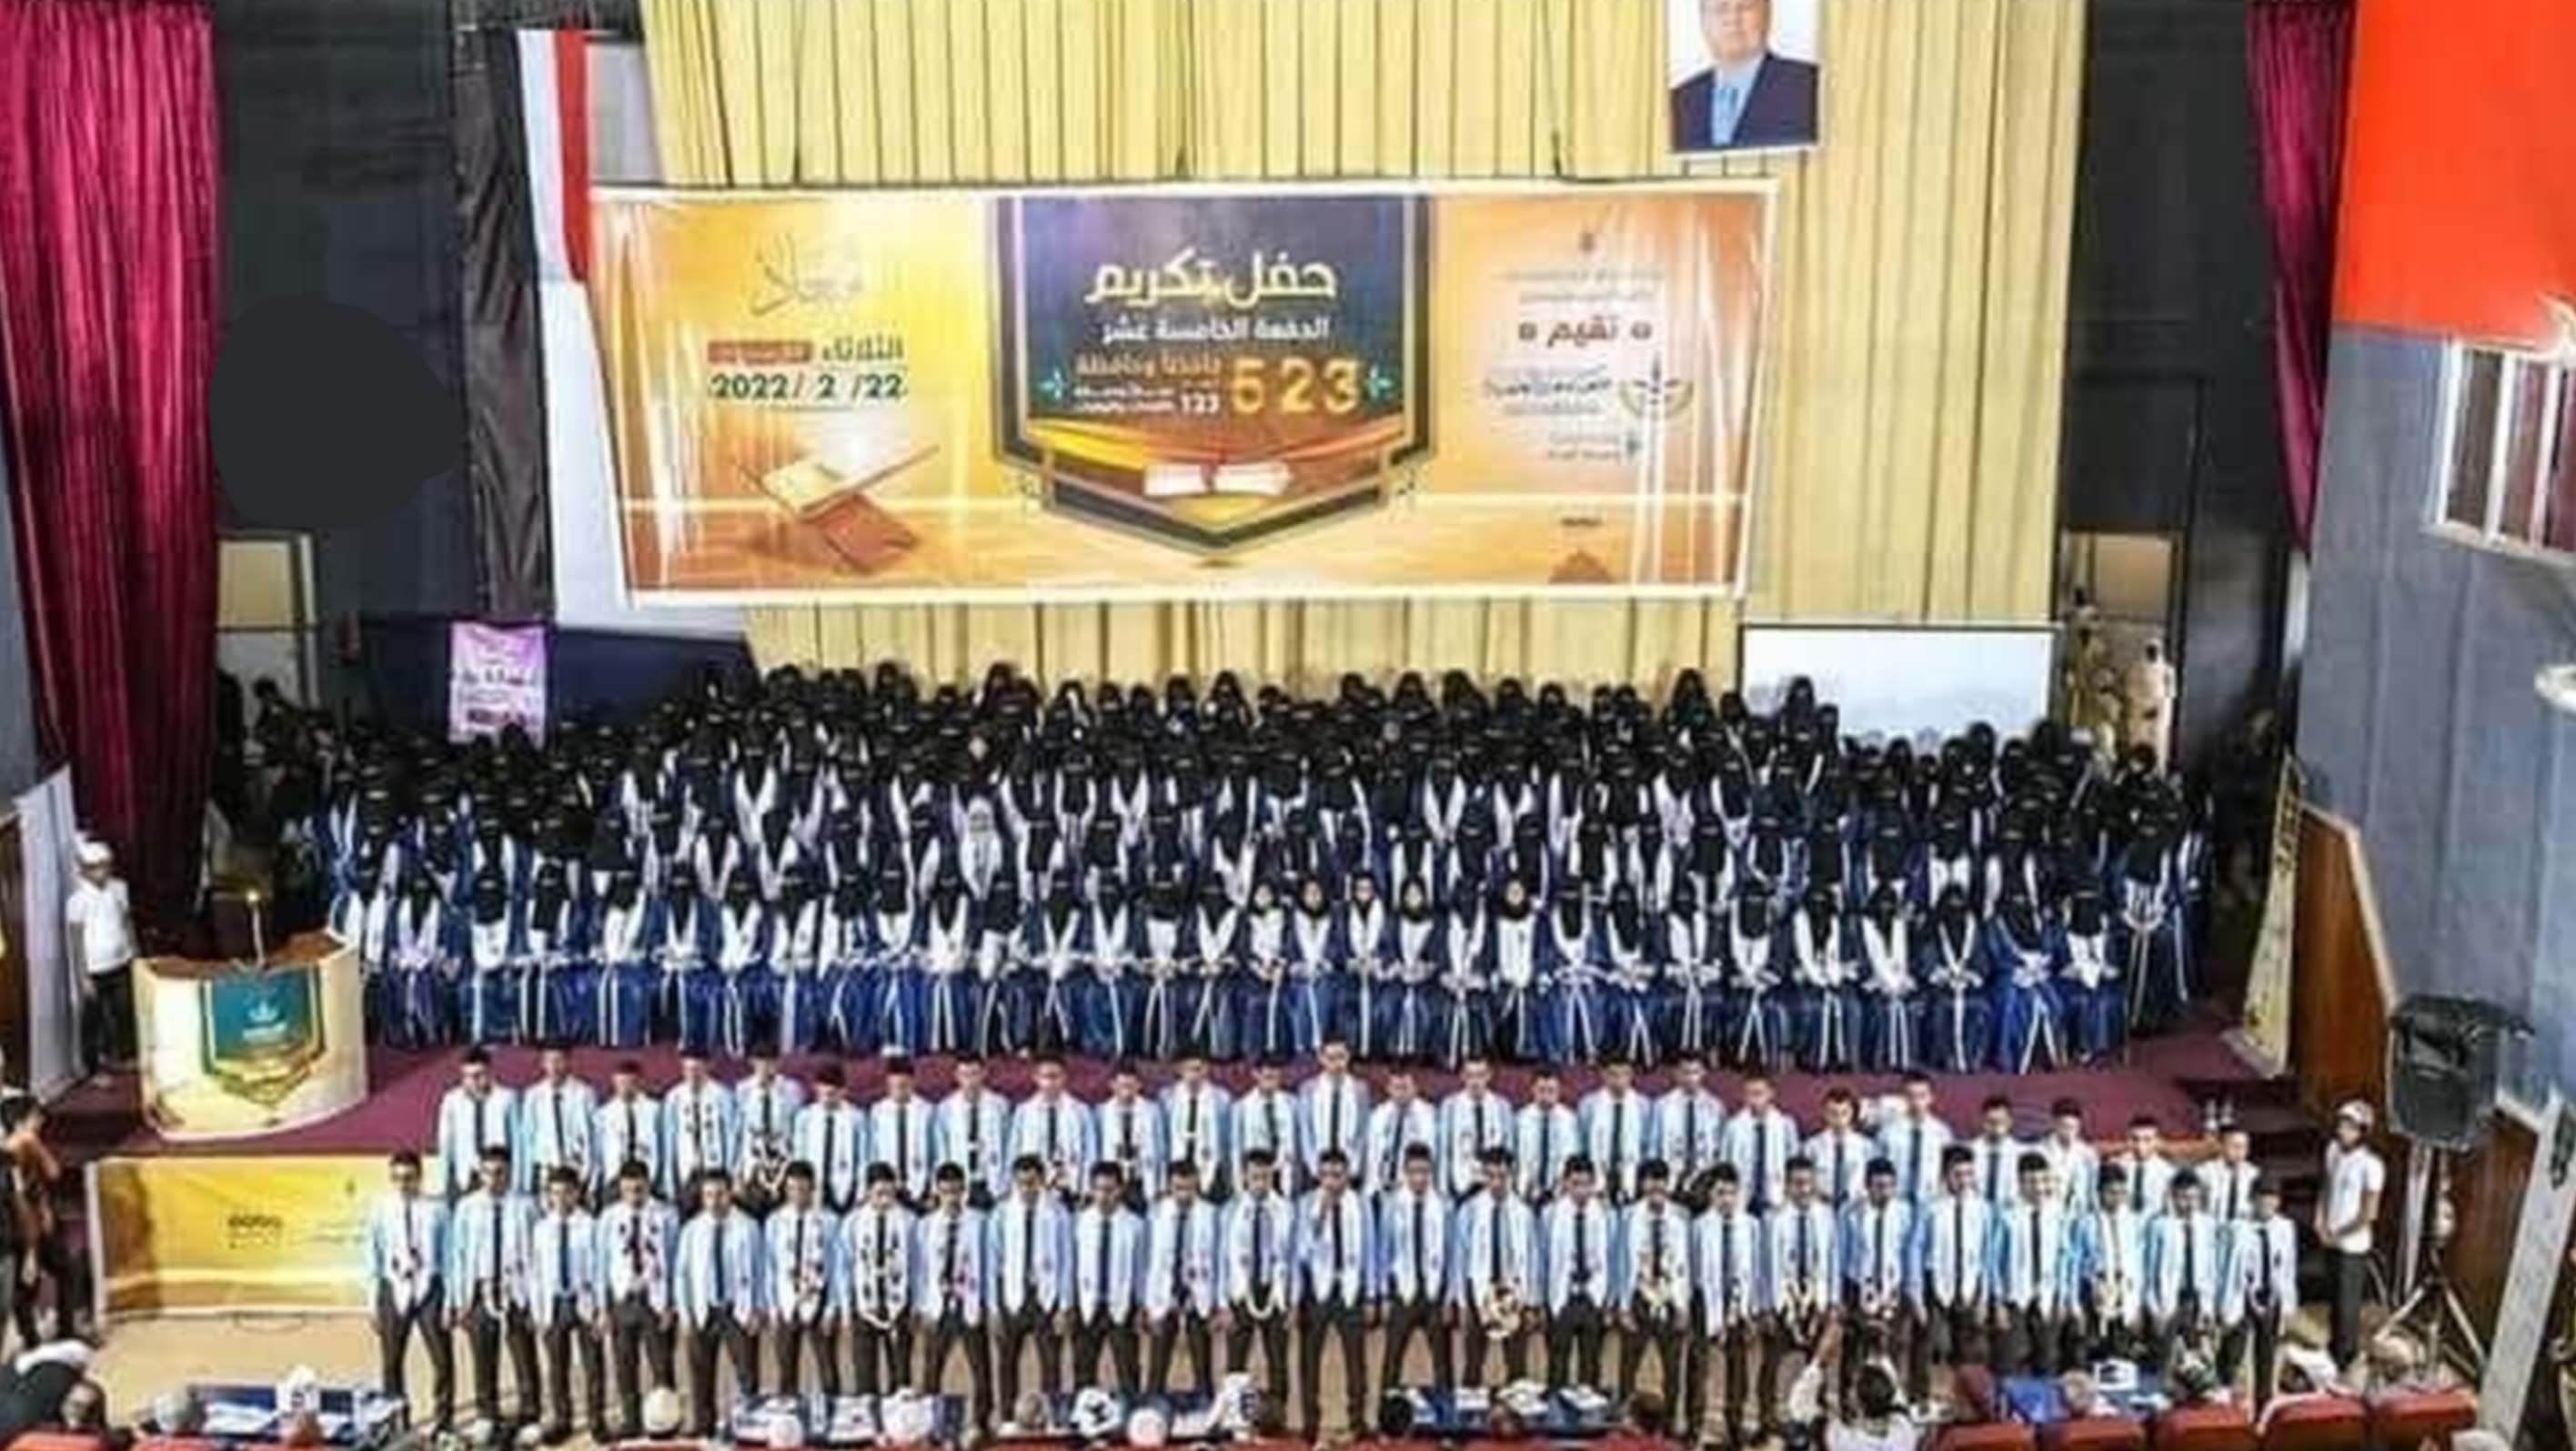 As part of promoting moderation values, Tawakkol Karman honors several hundreds of moderate youths